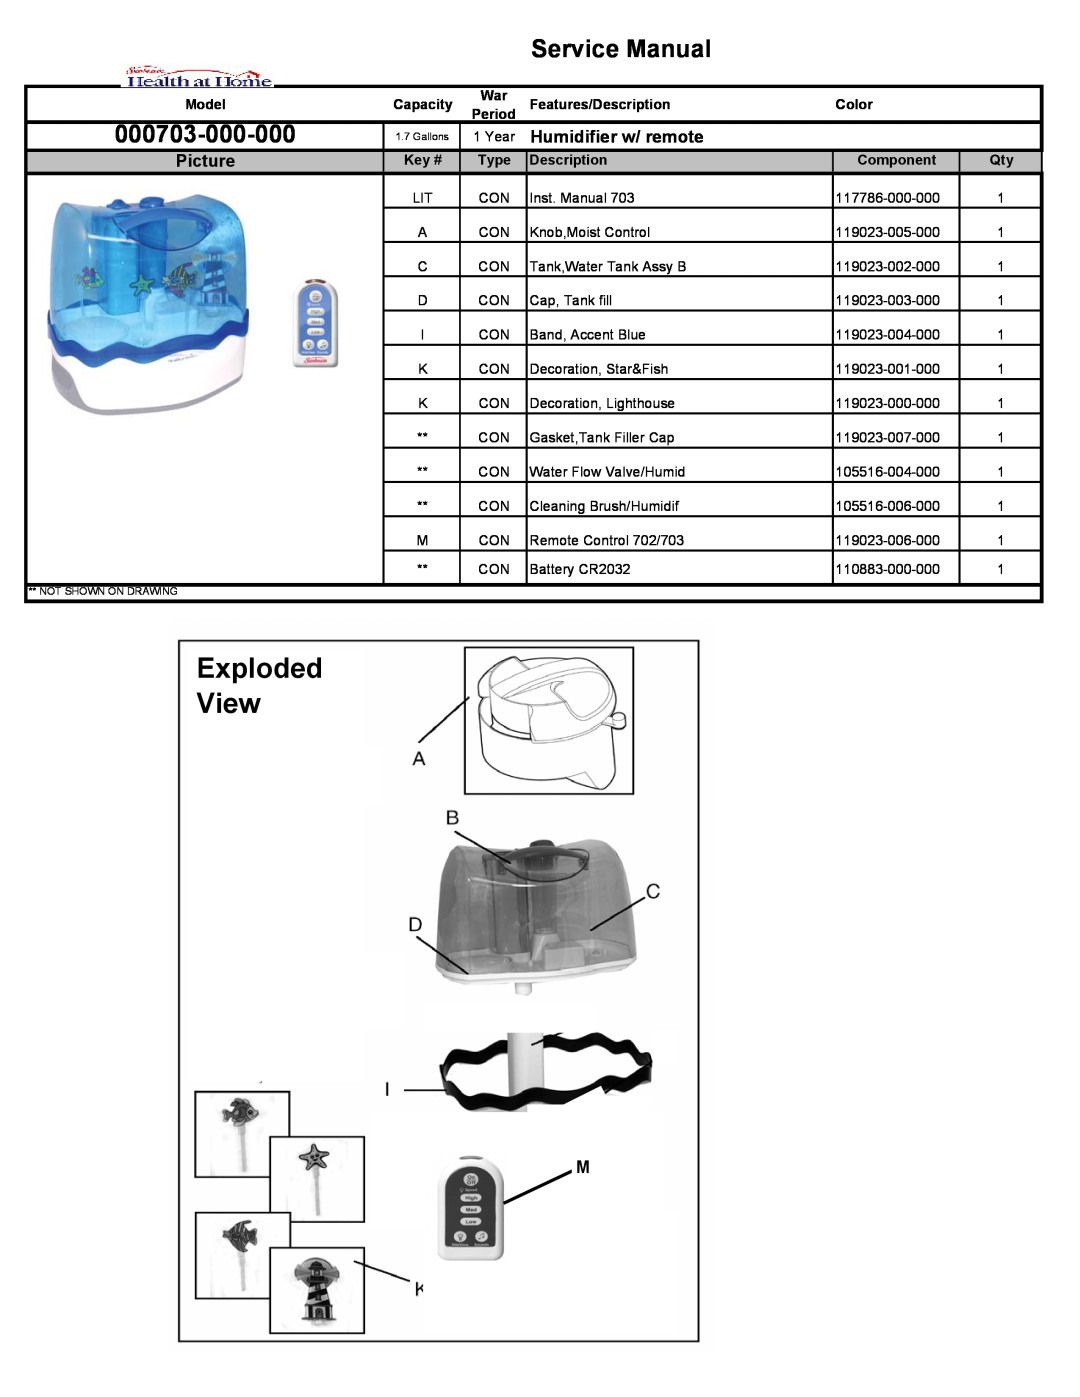 Heath Zenith 000703-000-000 service manual Exploded View, Humidifier w/ remote, Picture, Features/Description, Color 